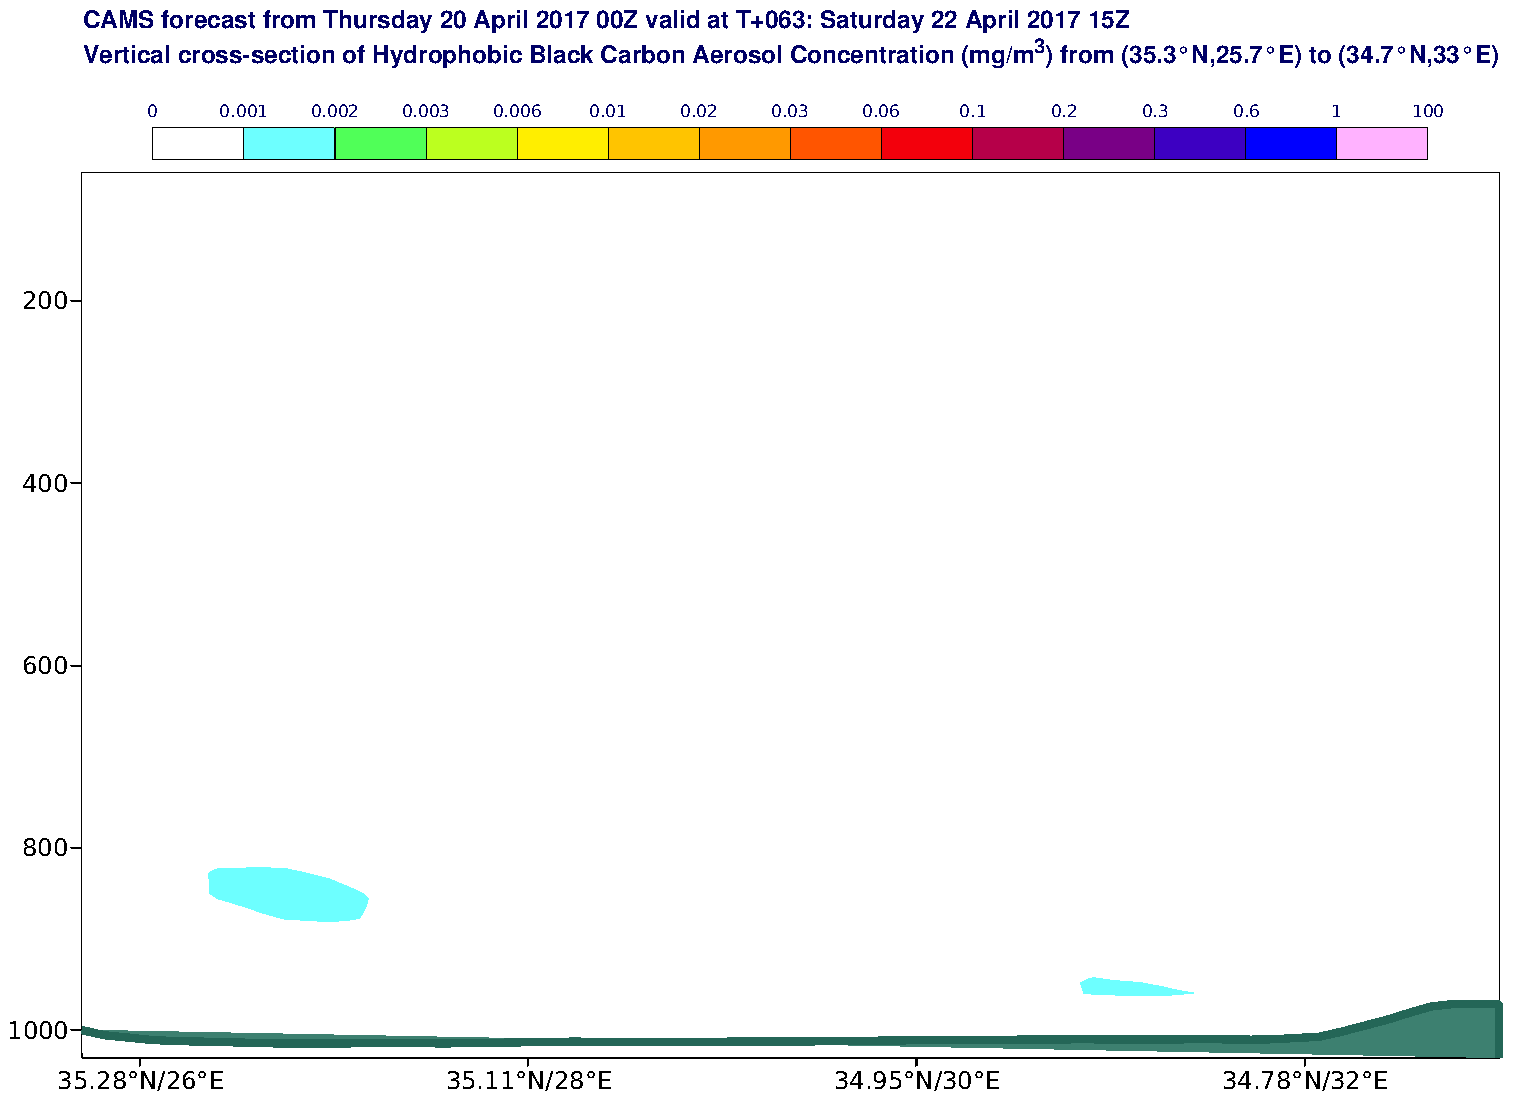 Vertical cross-section of Hydrophobic Black Carbon Aerosol Concentration (mg/m3) valid at T63 - 2017-04-22 15:00